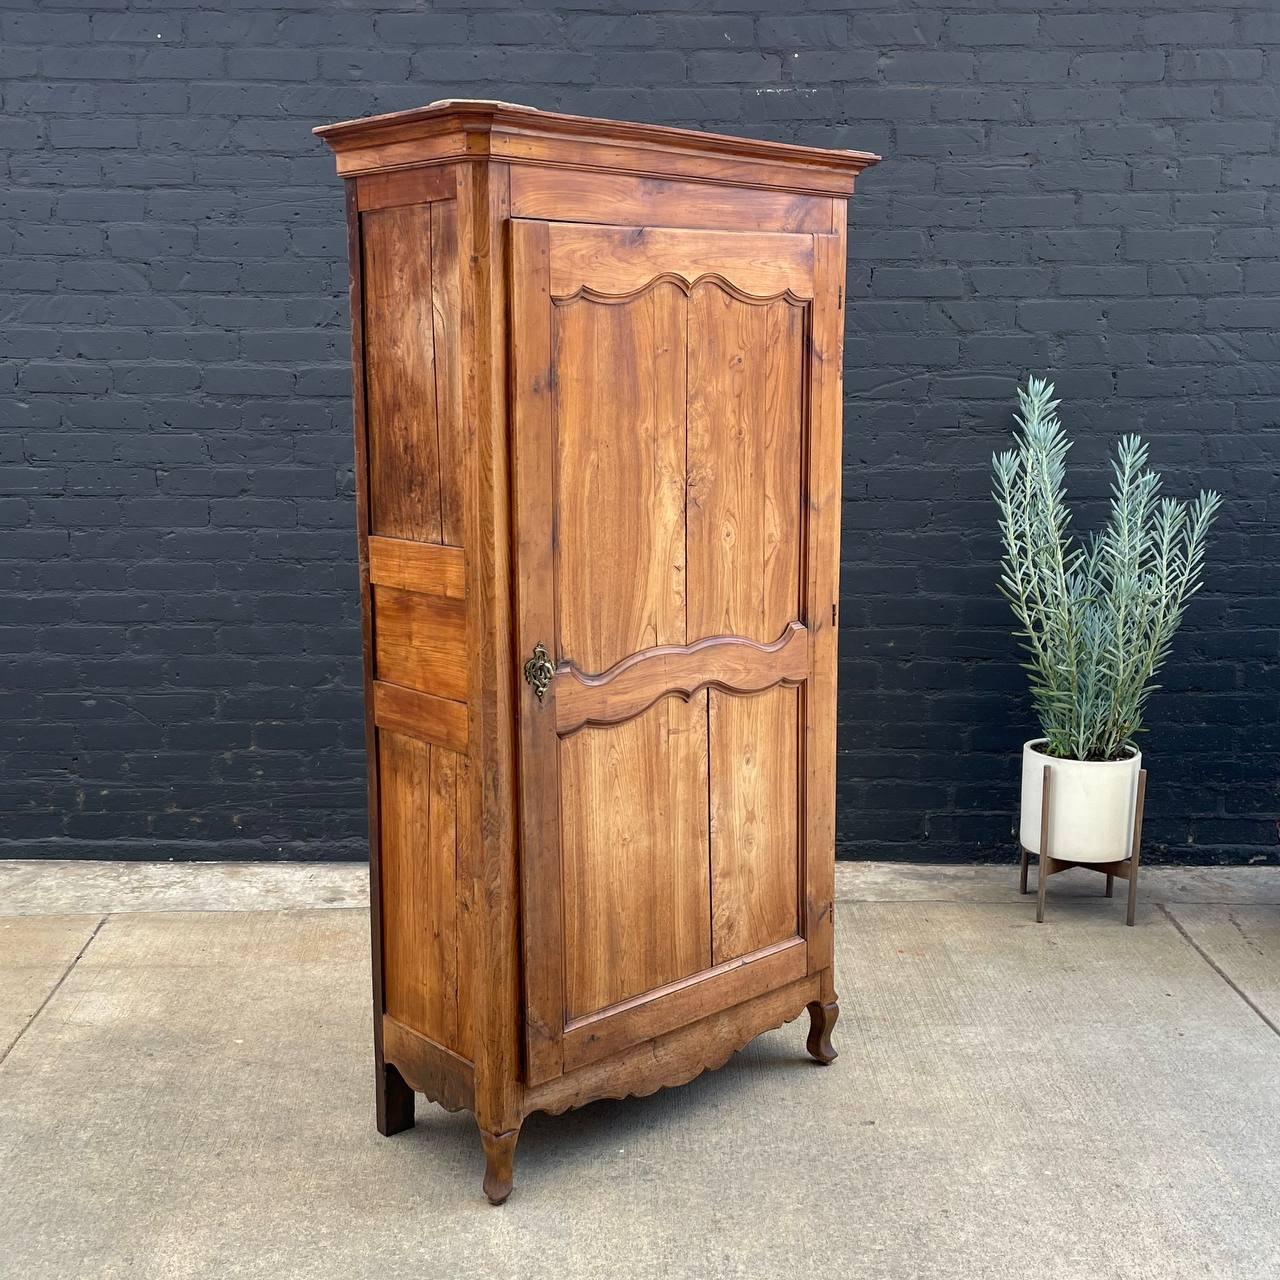 Antique French Provincial Solid Wood Armoire with Key

Country: France
Materials: Solid Wood
Style: French Provincial 
Year: 1910s

$3,895

Dimensions:
79”H x 43”W x 20”D.